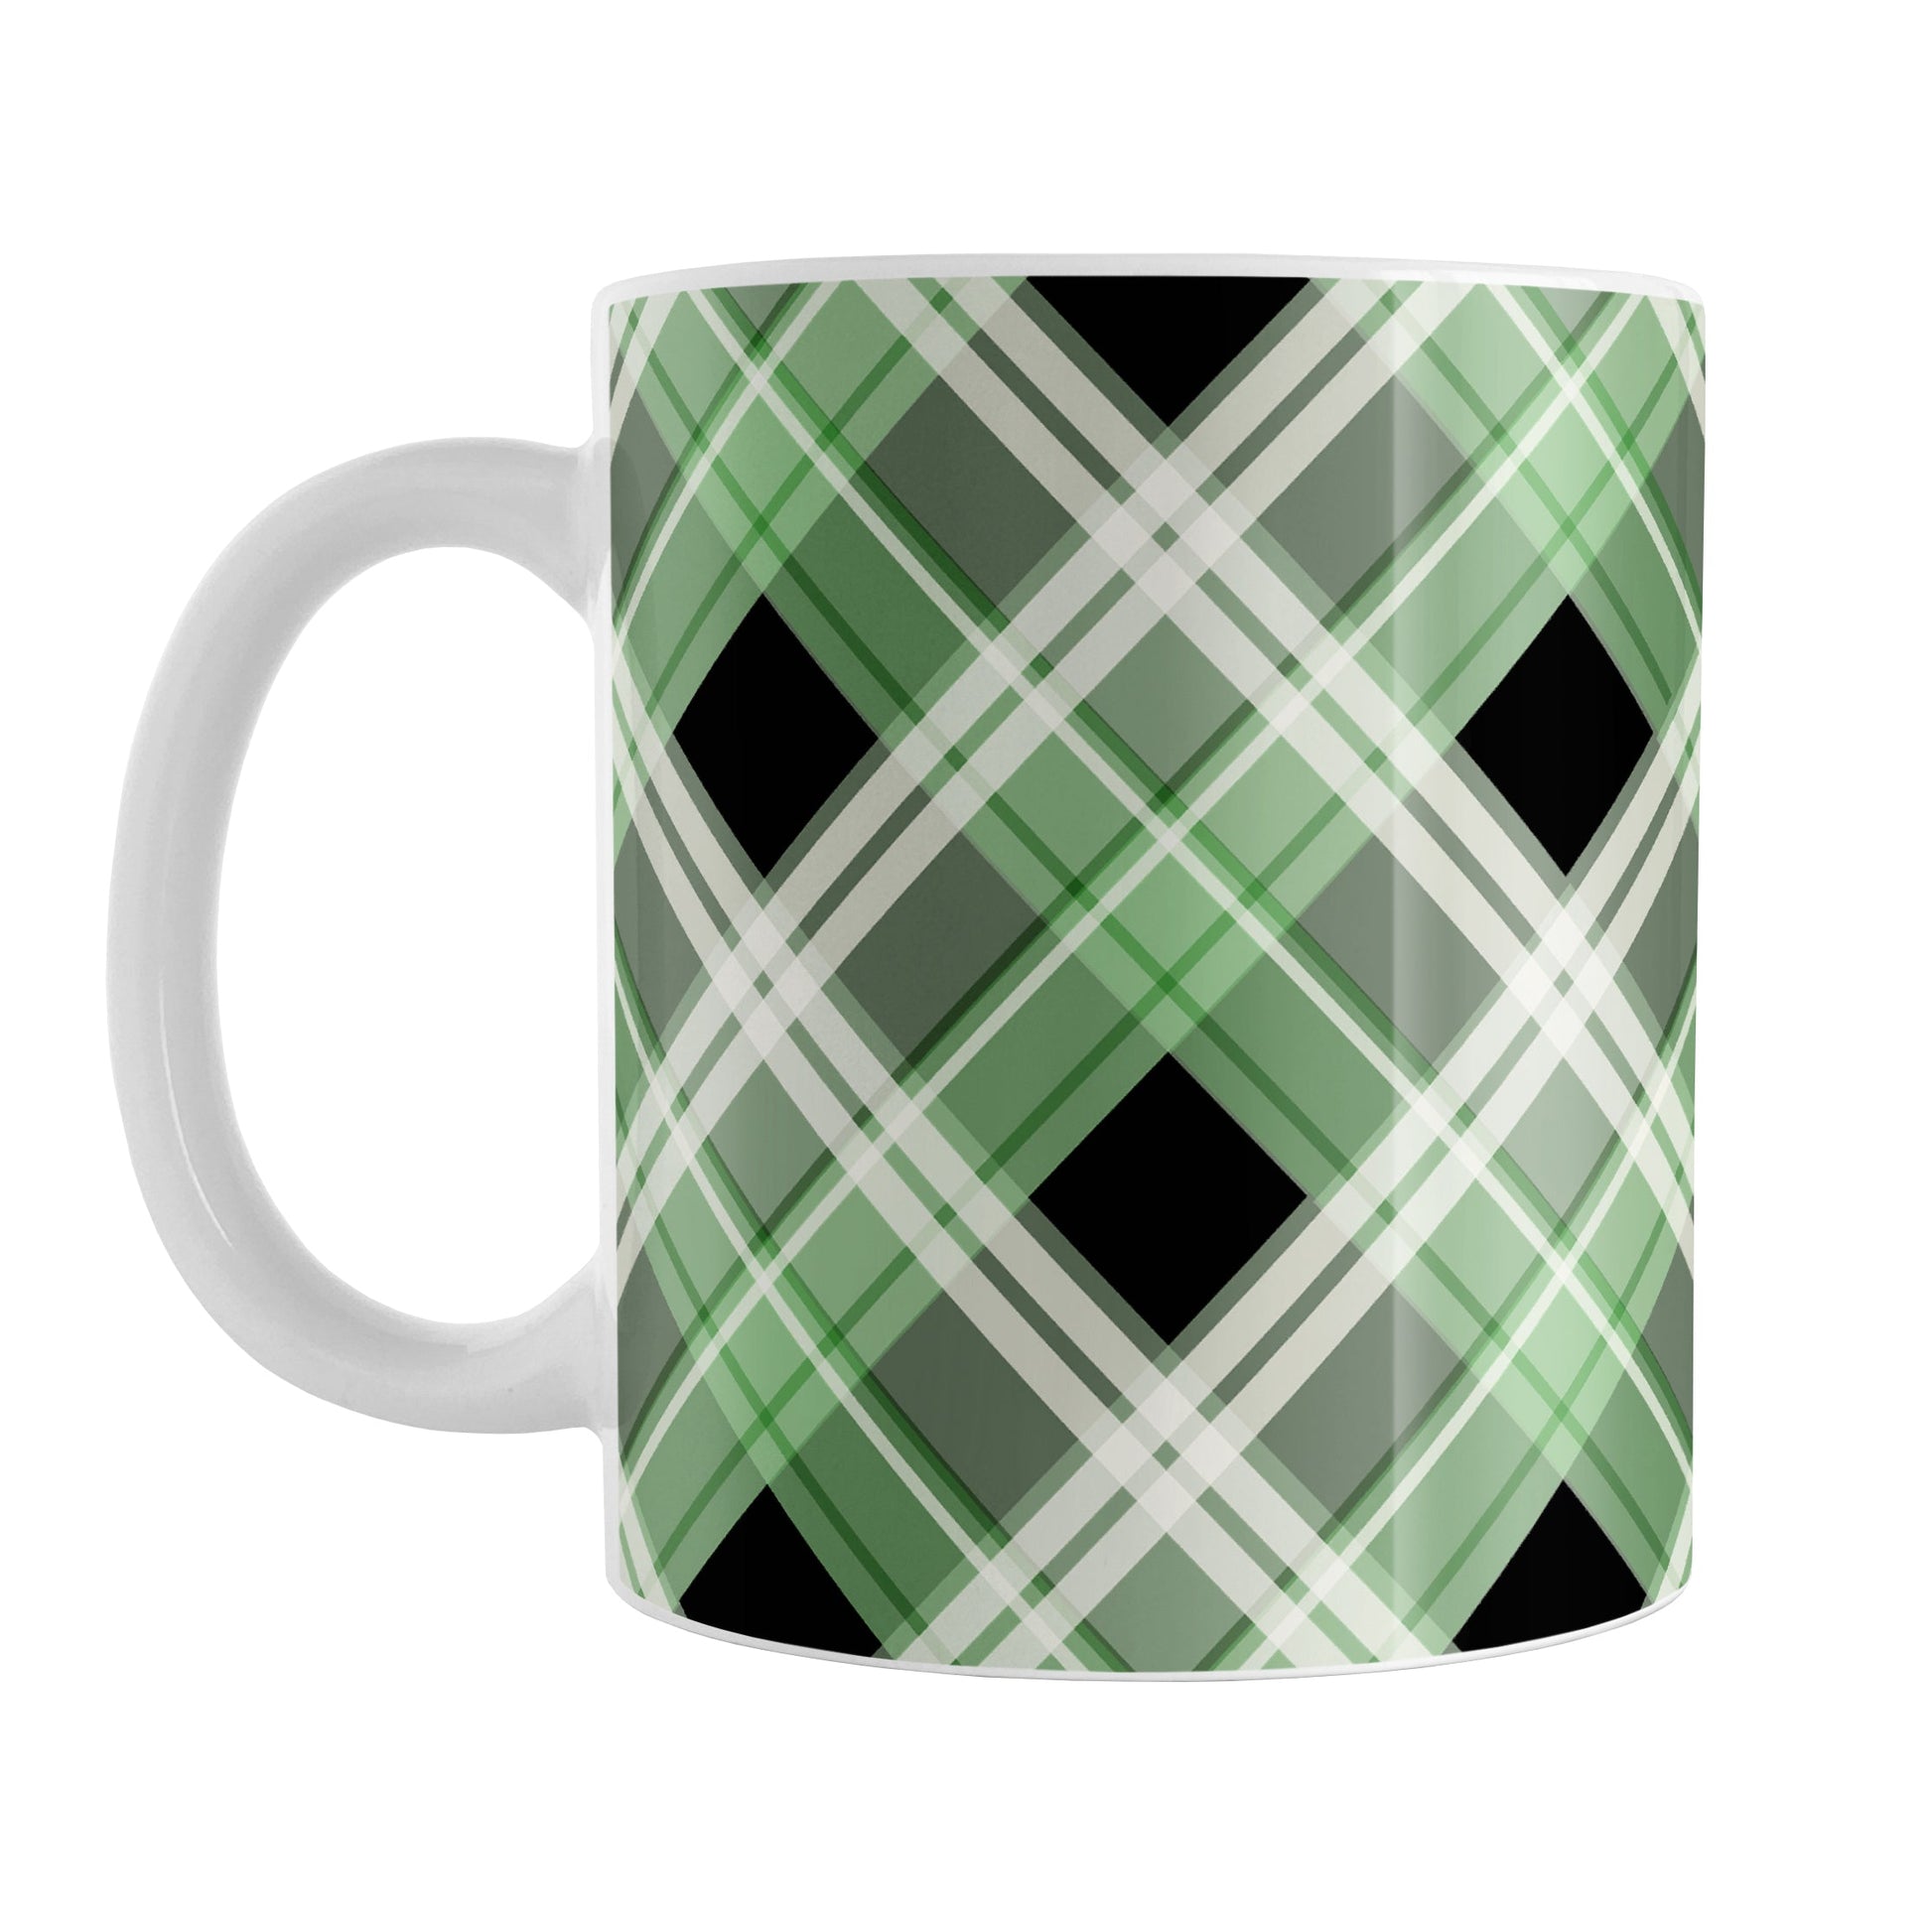 Alternative Green Plaid Mug (11oz) at Amy's Coffee Mugs. A ceramic coffee mug designed with a diagonal green, black, and white plaid pattern that wraps around the mug to the handle. Designed for someone who loves plaid patterns and is a fan of the color green.